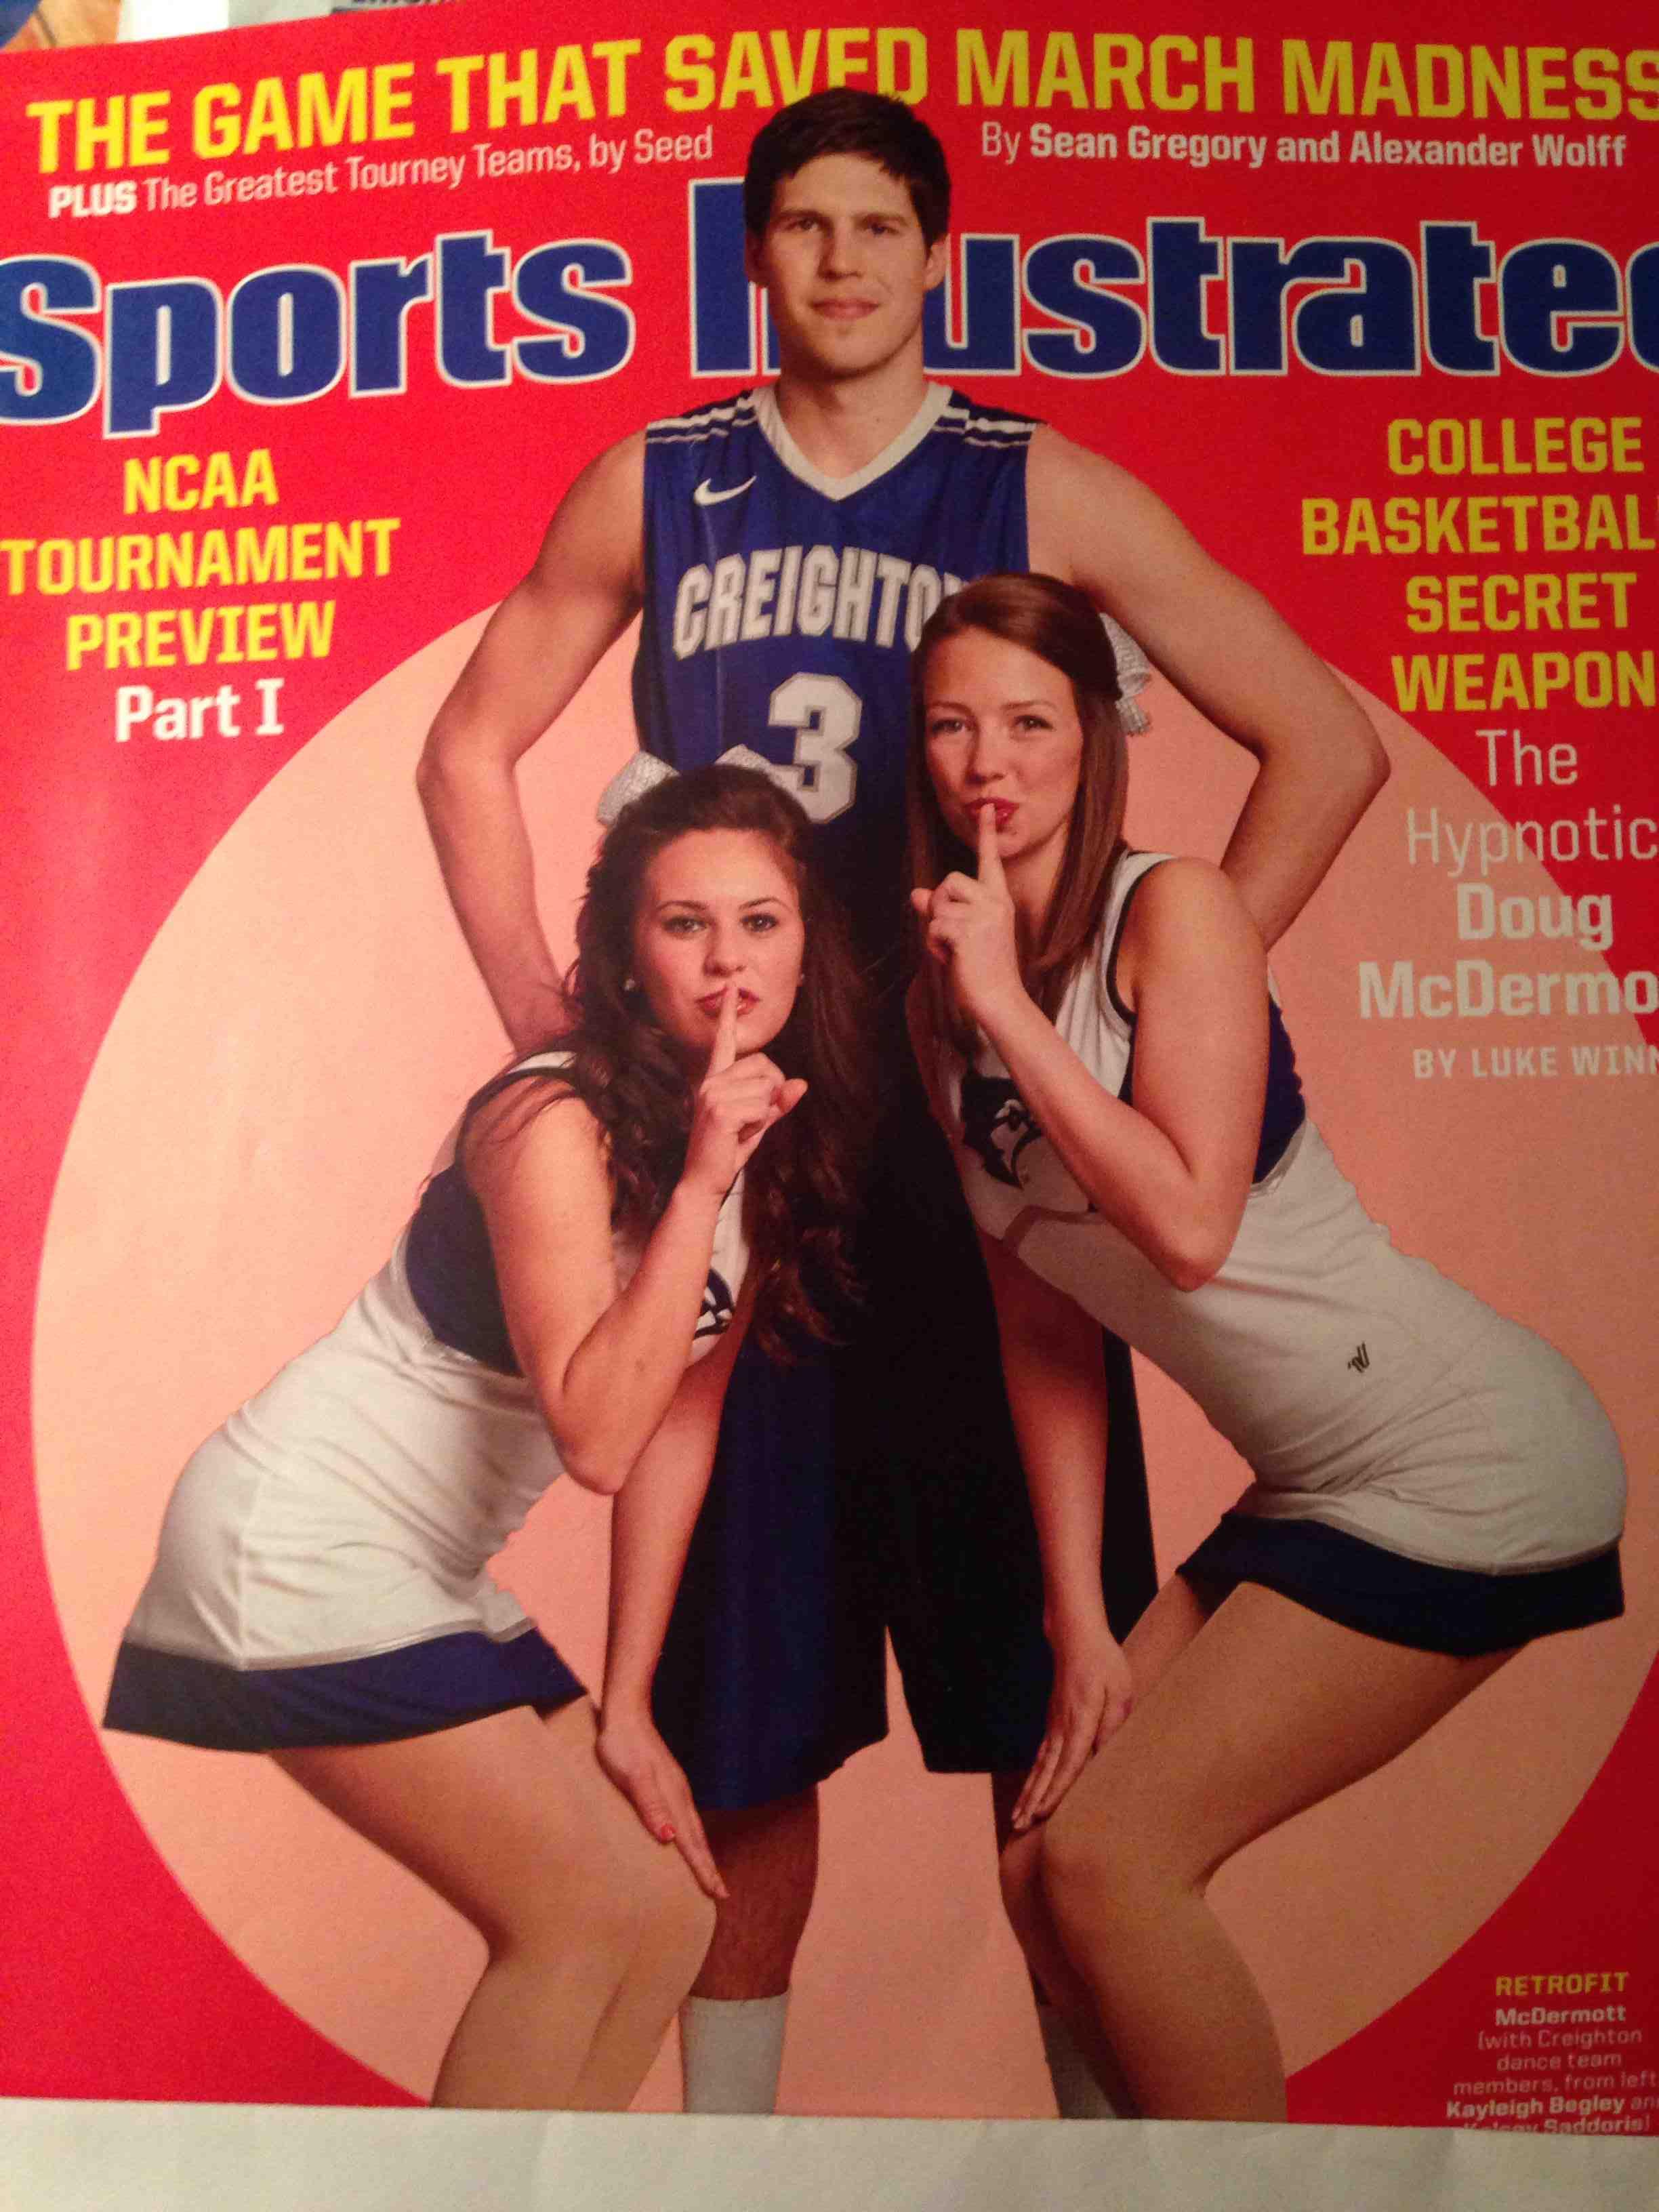 Going through old magazines and our man McBuckets is on a cover ...